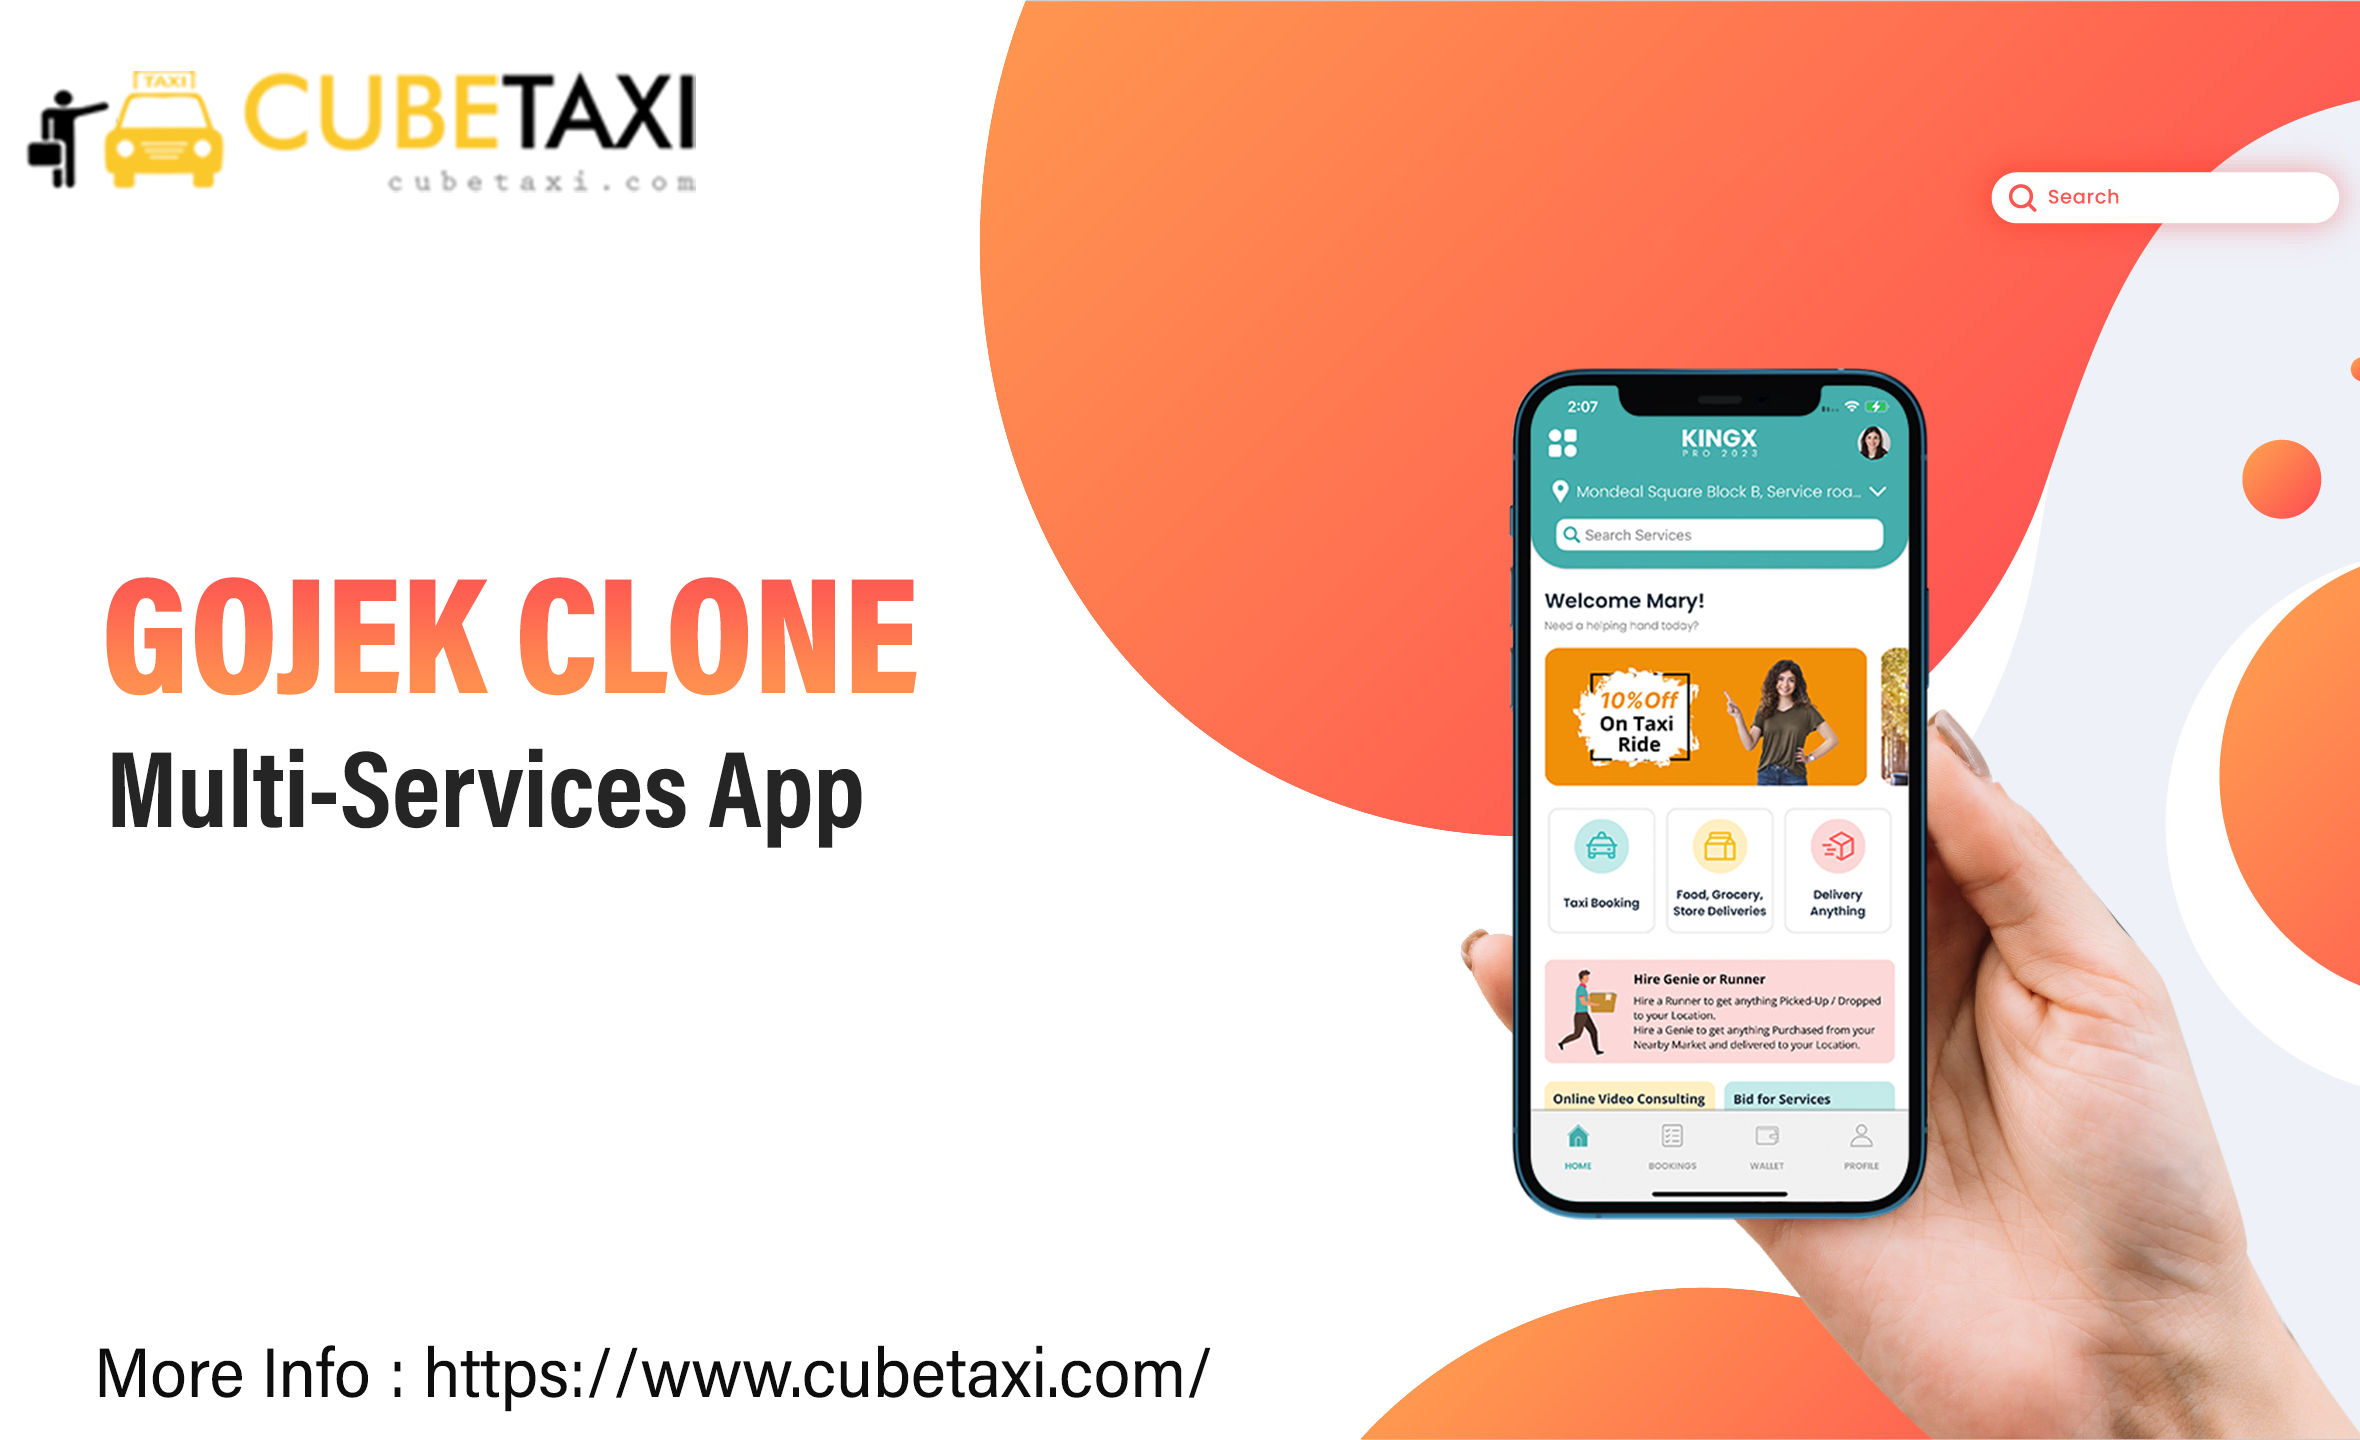 {em CUBETAX

Search

Search

GOJEK CLONE

Multi-Services App

w;
Pre» Gorse 19,g0t arytng Ar chased fom your

 

More Info : https://www.cubetaxi.com/